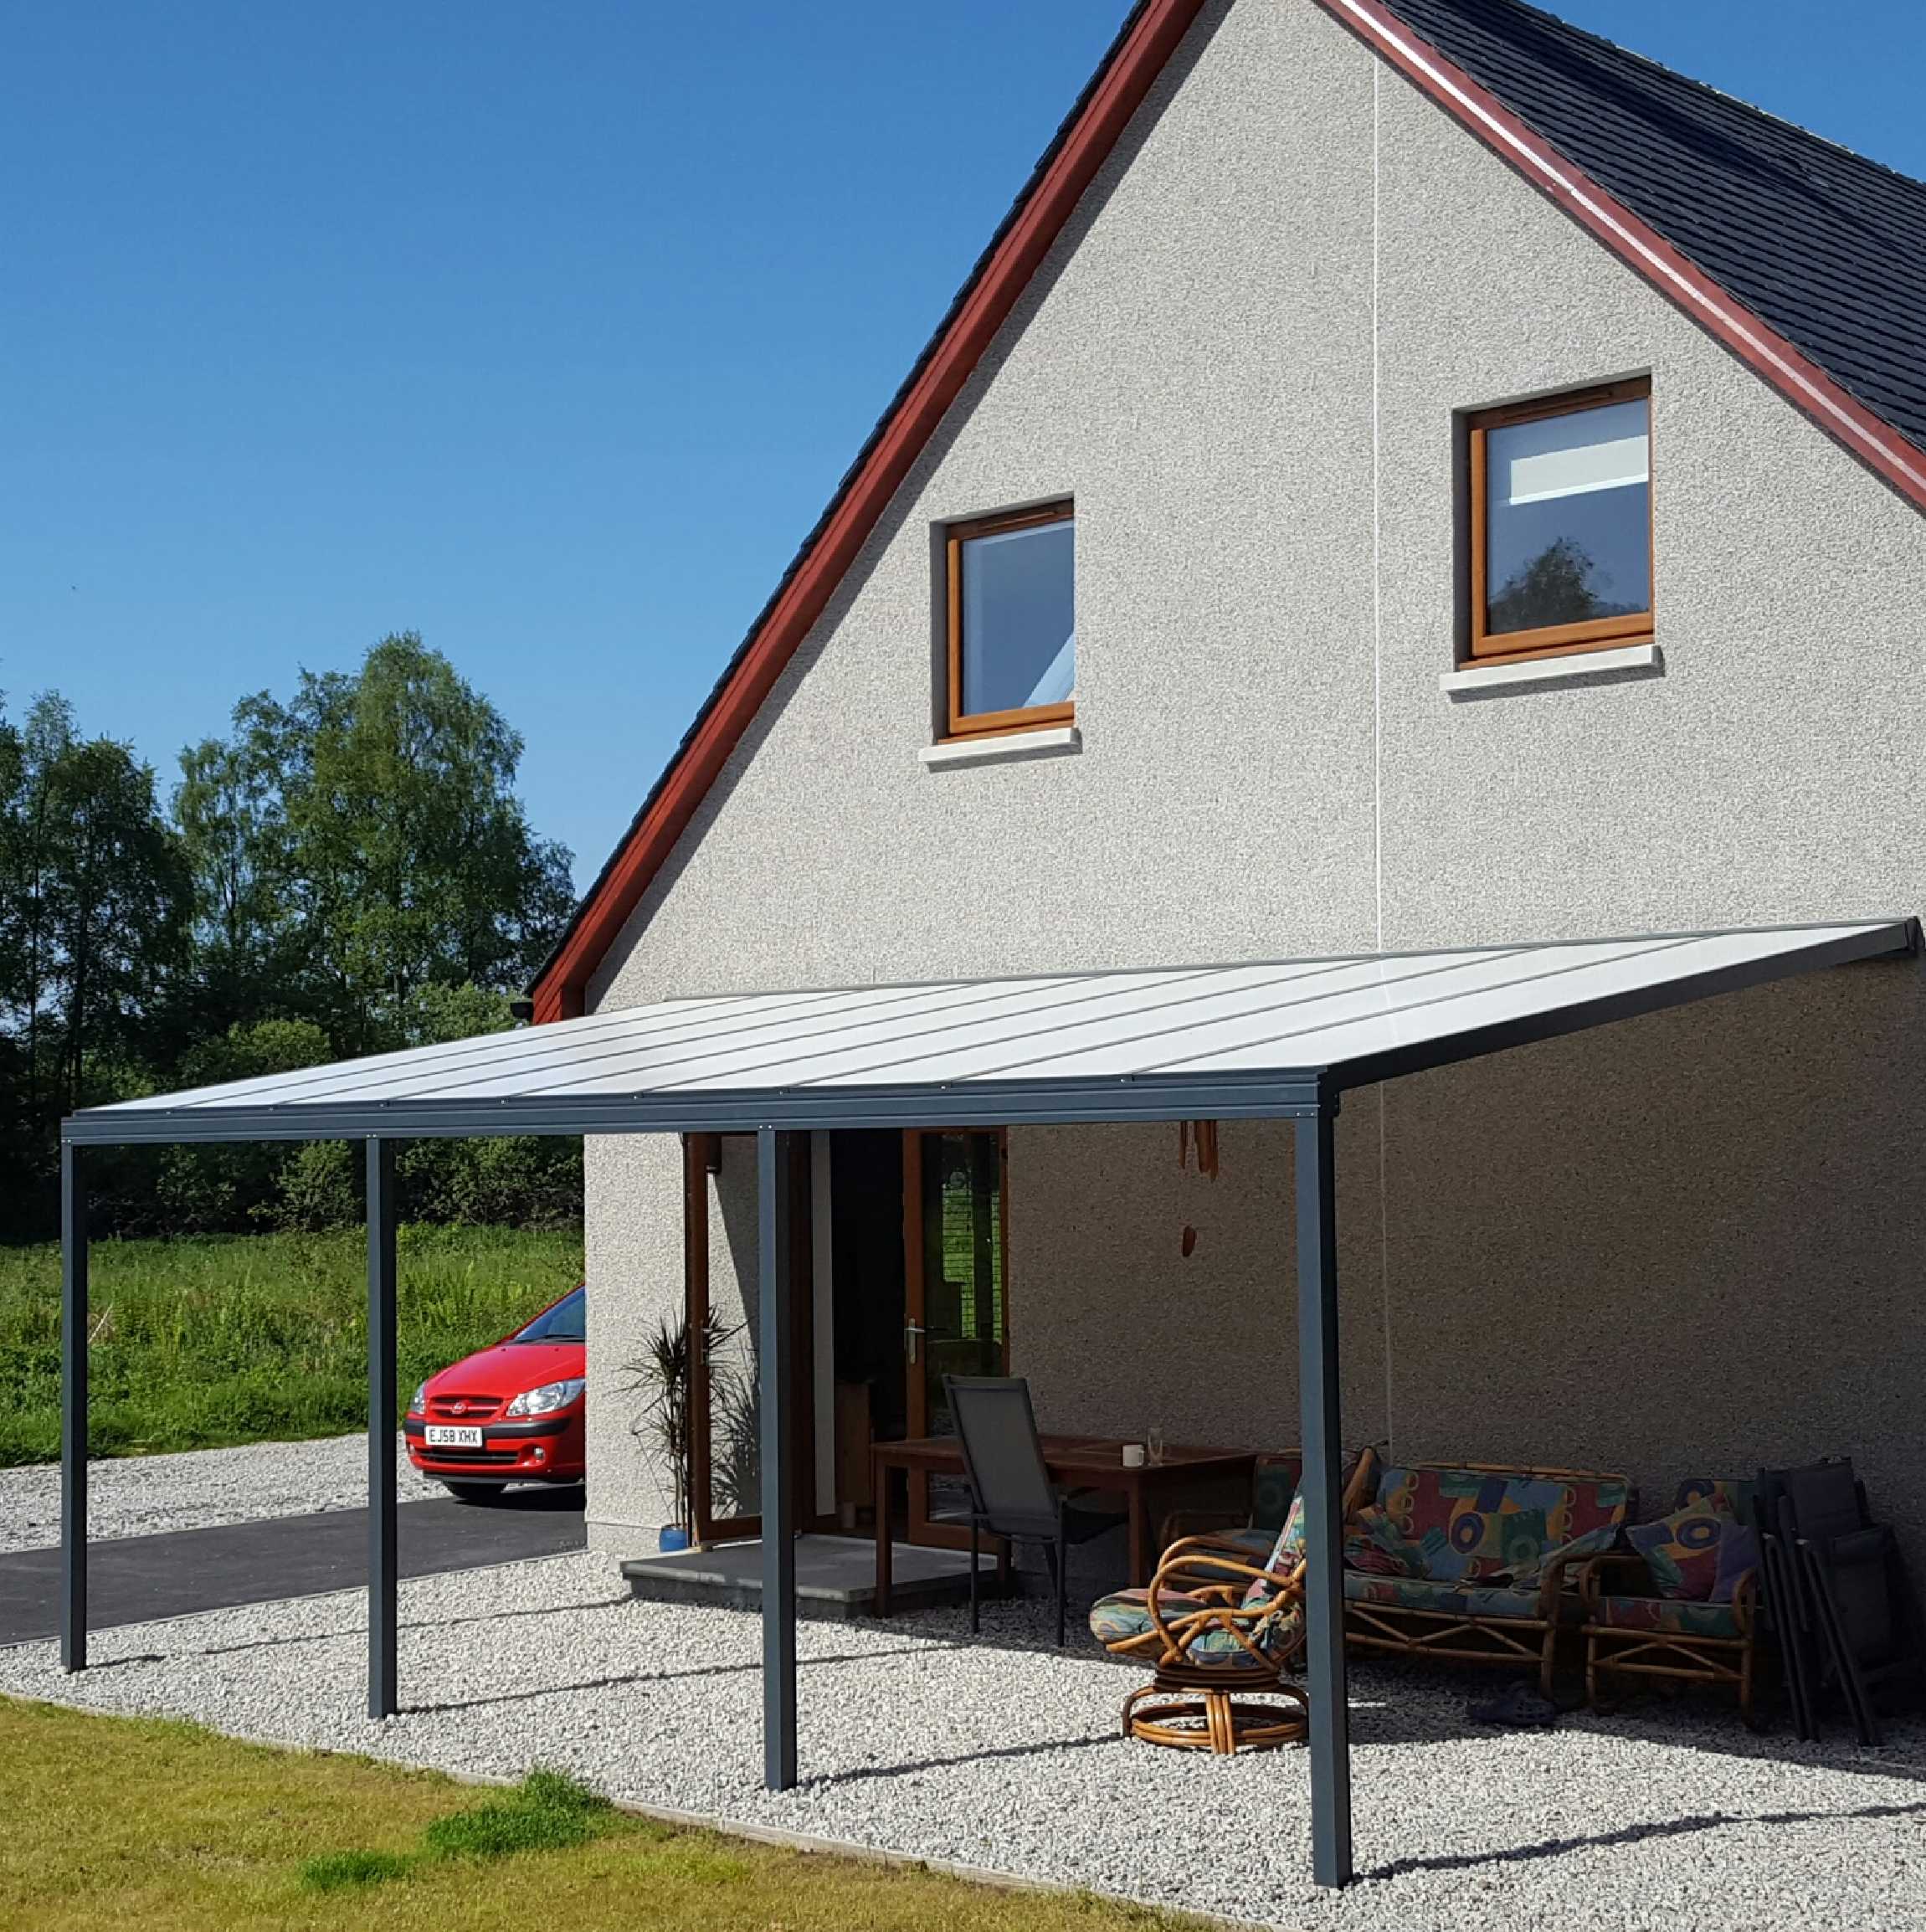 Great selection of Omega Smart Lean-To Canopy, Anthracite Grey, 16mm Polycarbonate Glazing - 6.3m (W) x 4.0m (P), (4) Supporting Posts